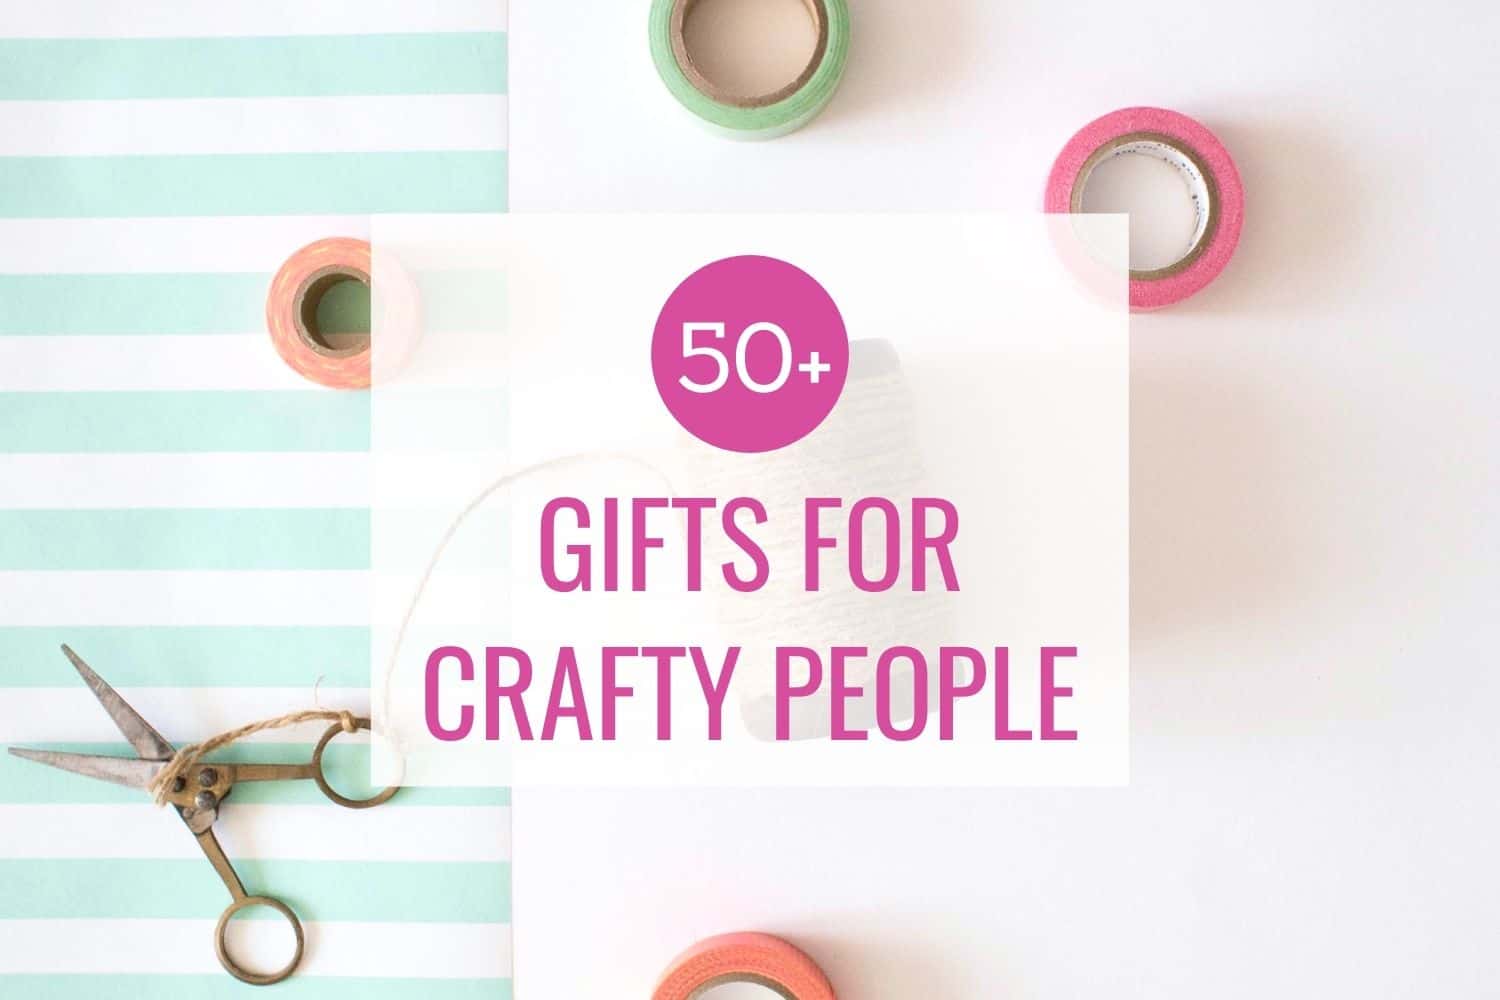 50 homemade gift ideas to make for under $5 - The Inspiration Board